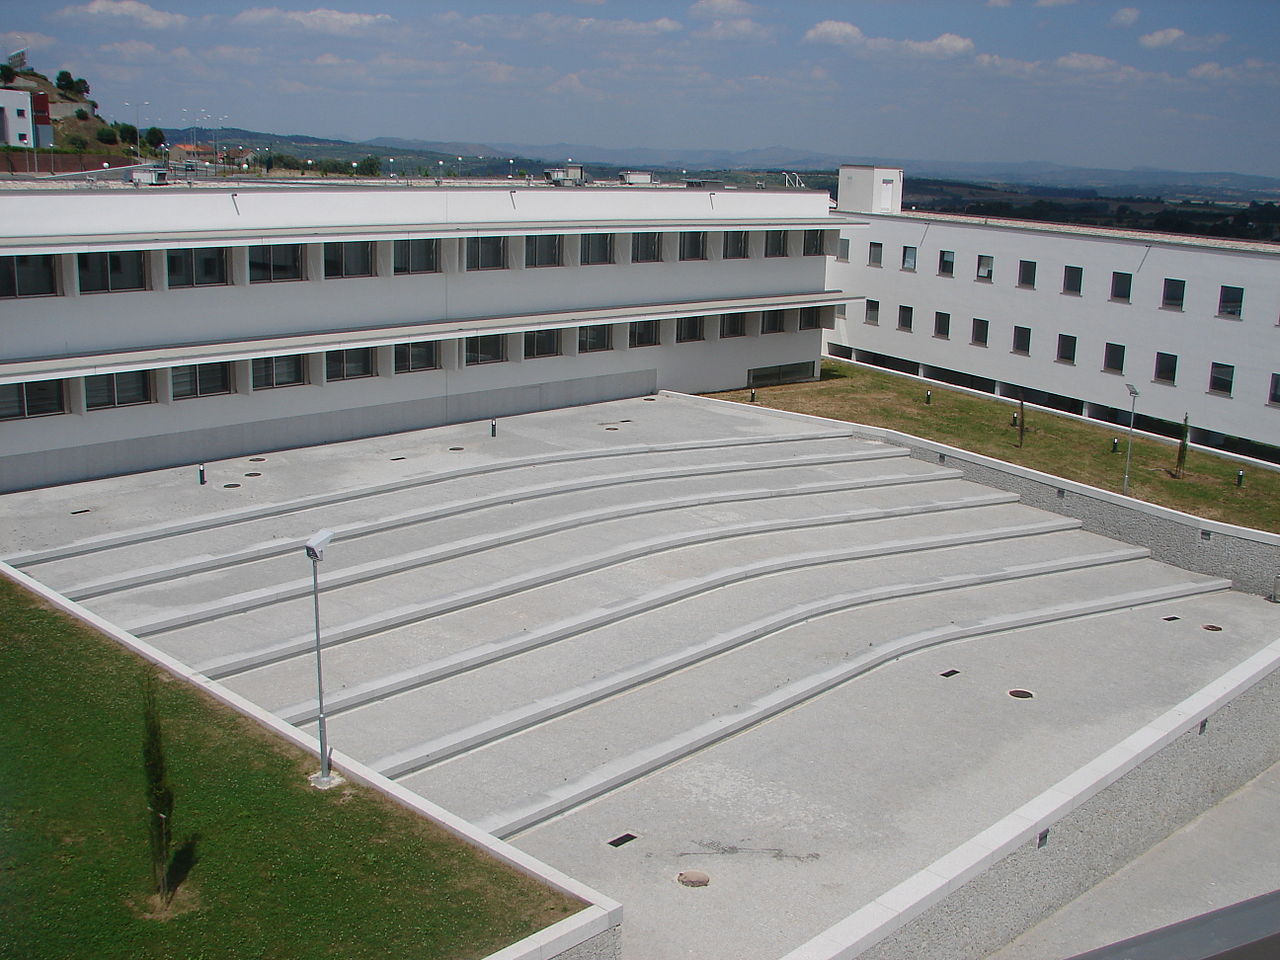 his is the outside auditorium of the Health Sciences Faculty of UBI